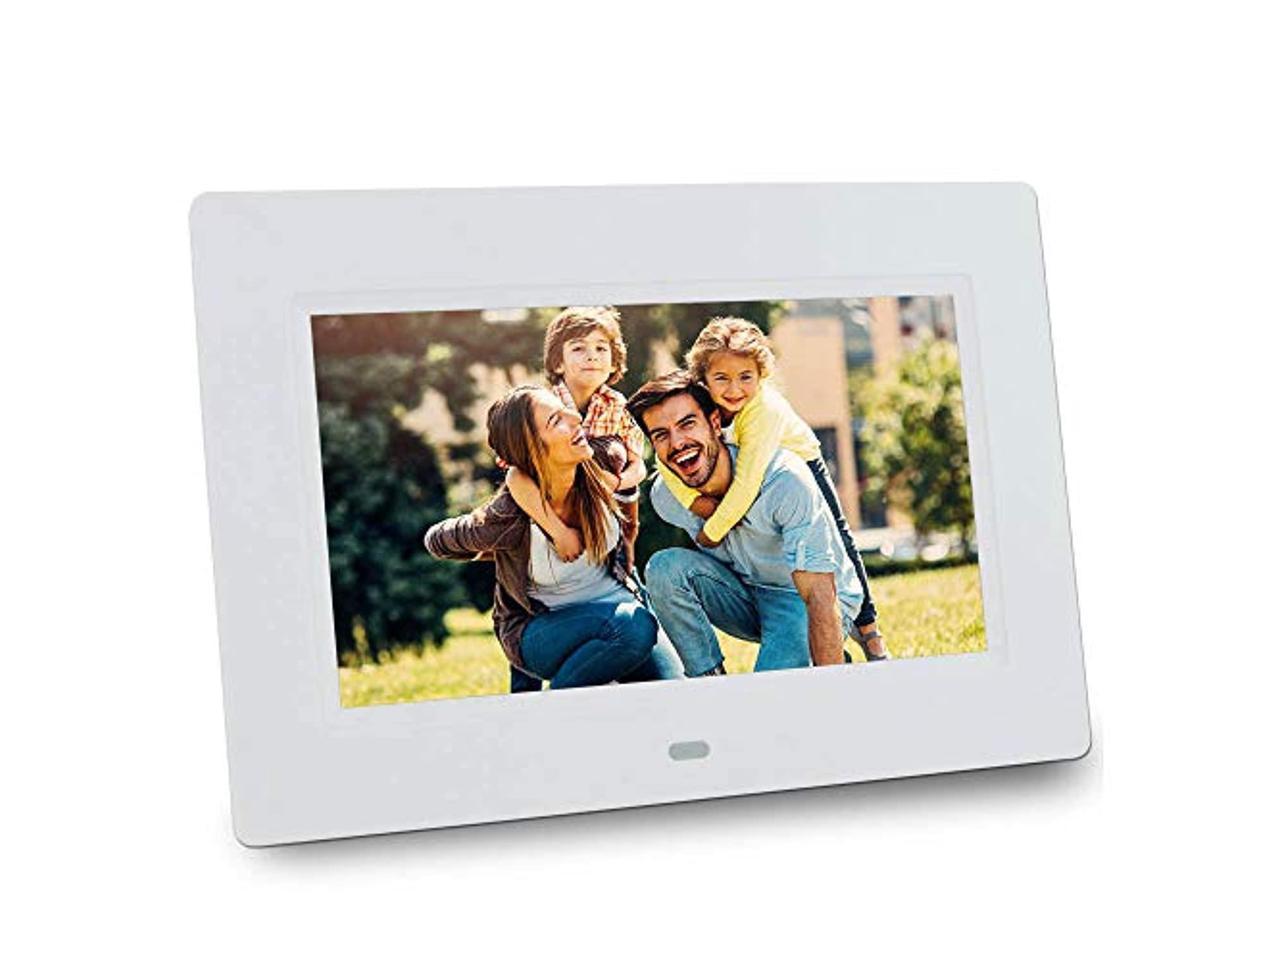 MP3/Photo/Video Player with Remote Control 9-Inch Digital Picture Photo Frame 4:3 High Resolution IPS LCD Screen 